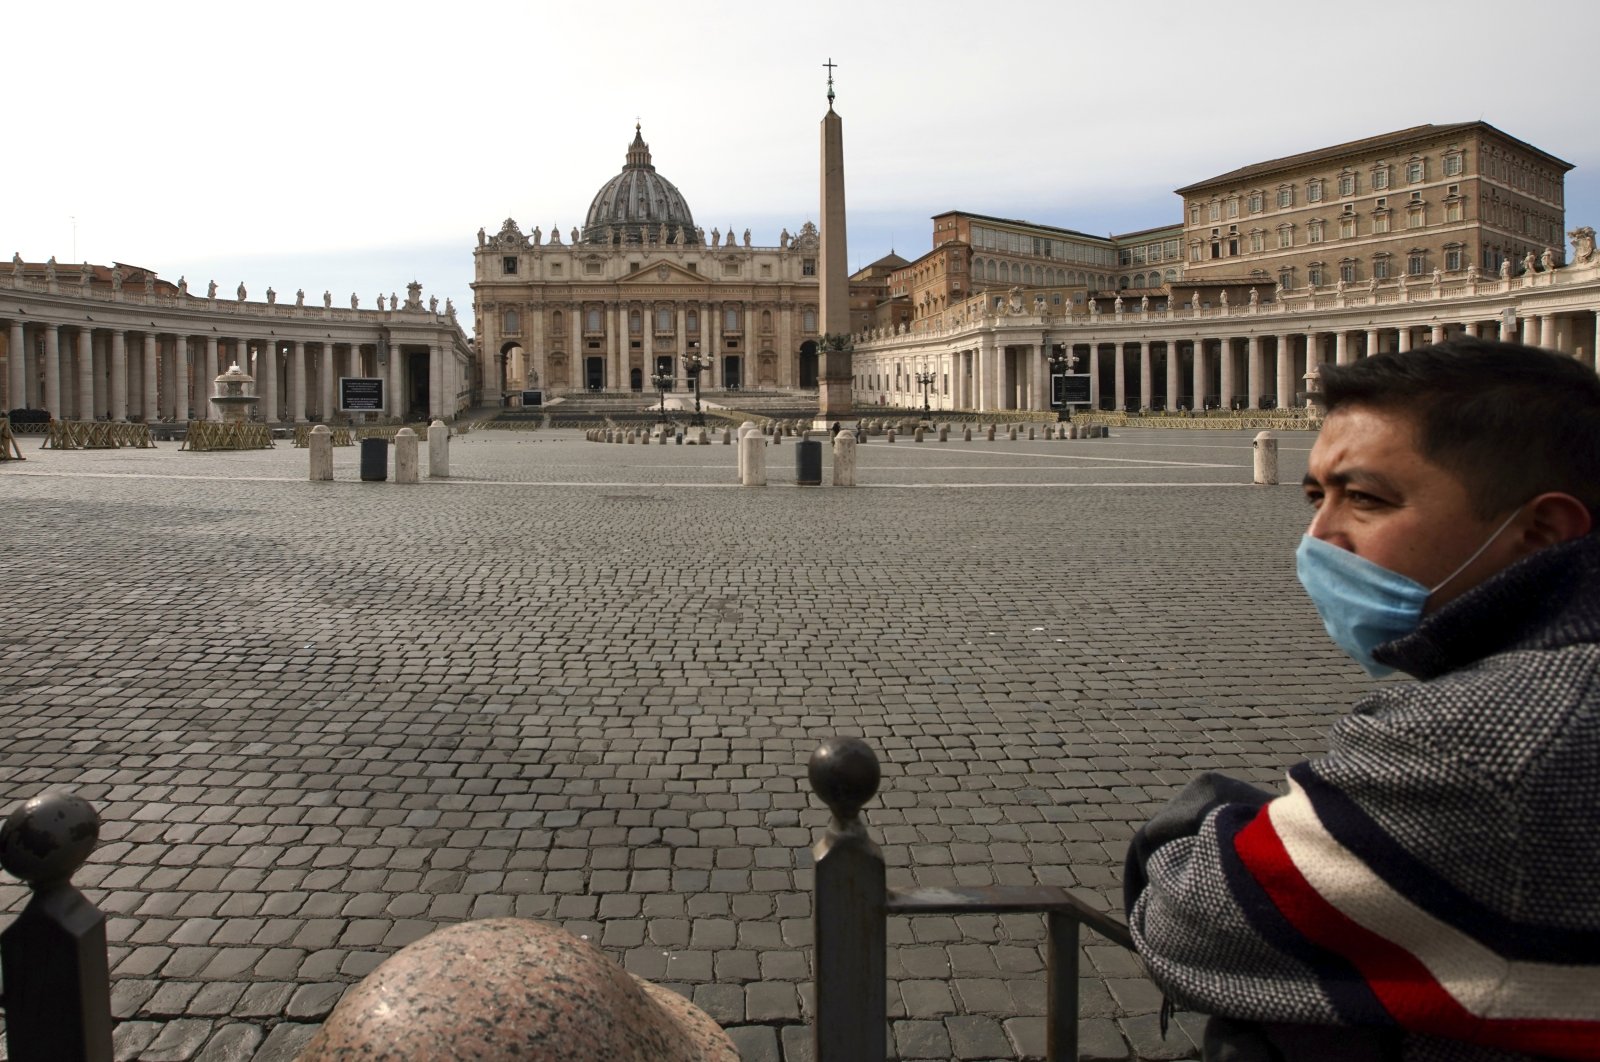 A man wears a mask as he looks at an empty St. Peter's Square after the Vatican erected a new barricade at the edge of the square, in Rome, Tuesday, March 10, 2020. (AP Photo)